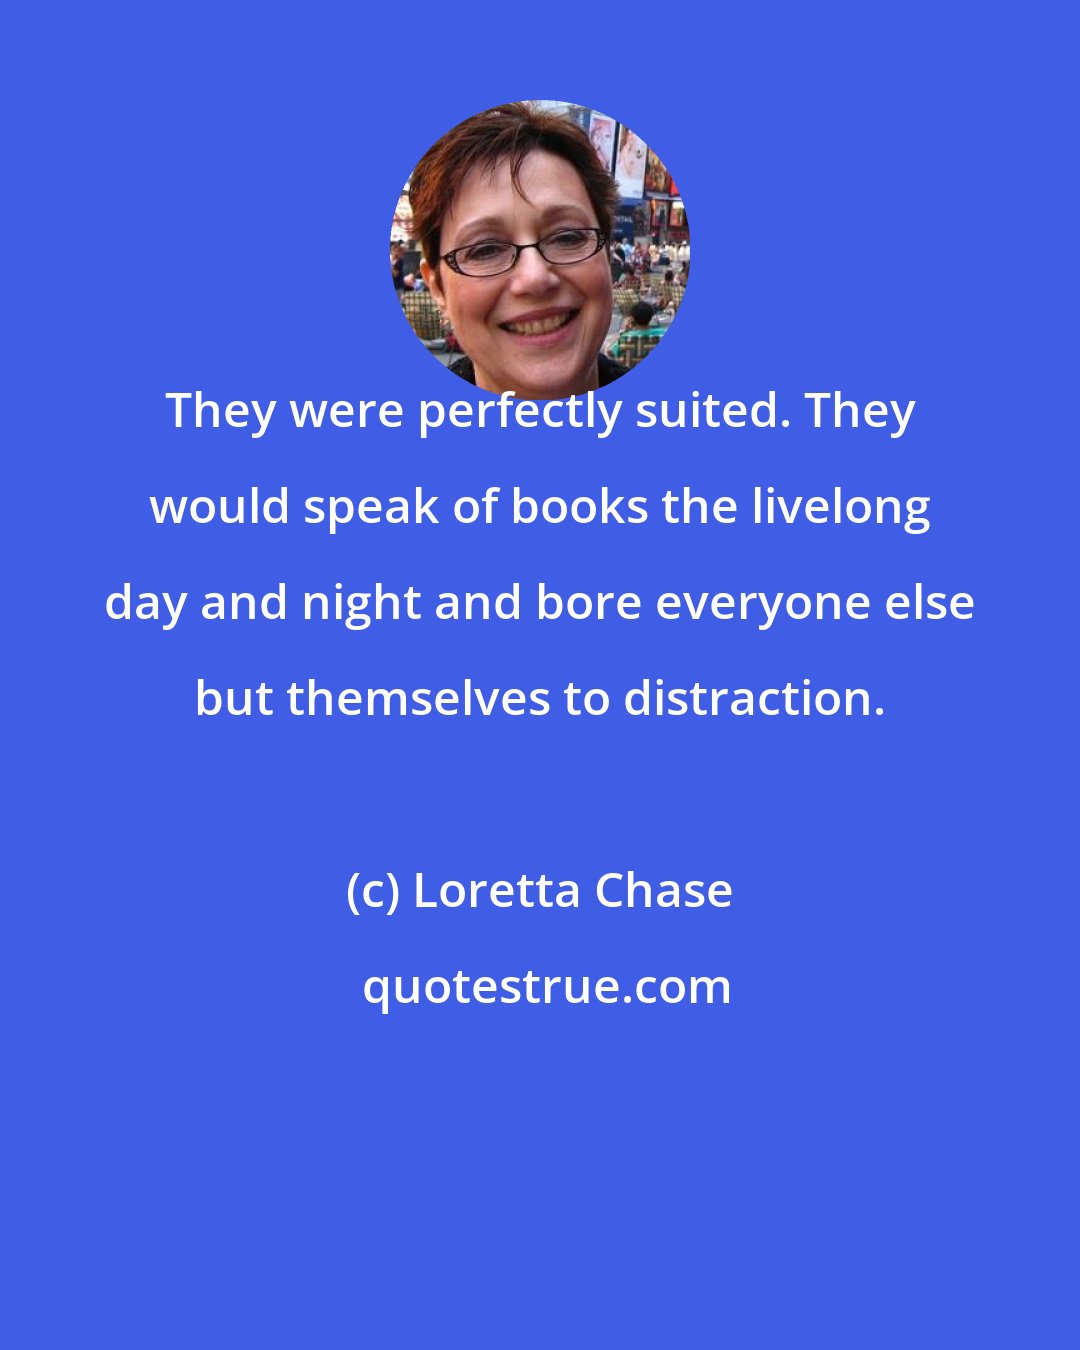 Loretta Chase: They were perfectly suited. They would speak of books the livelong day and night and bore everyone else but themselves to distraction.